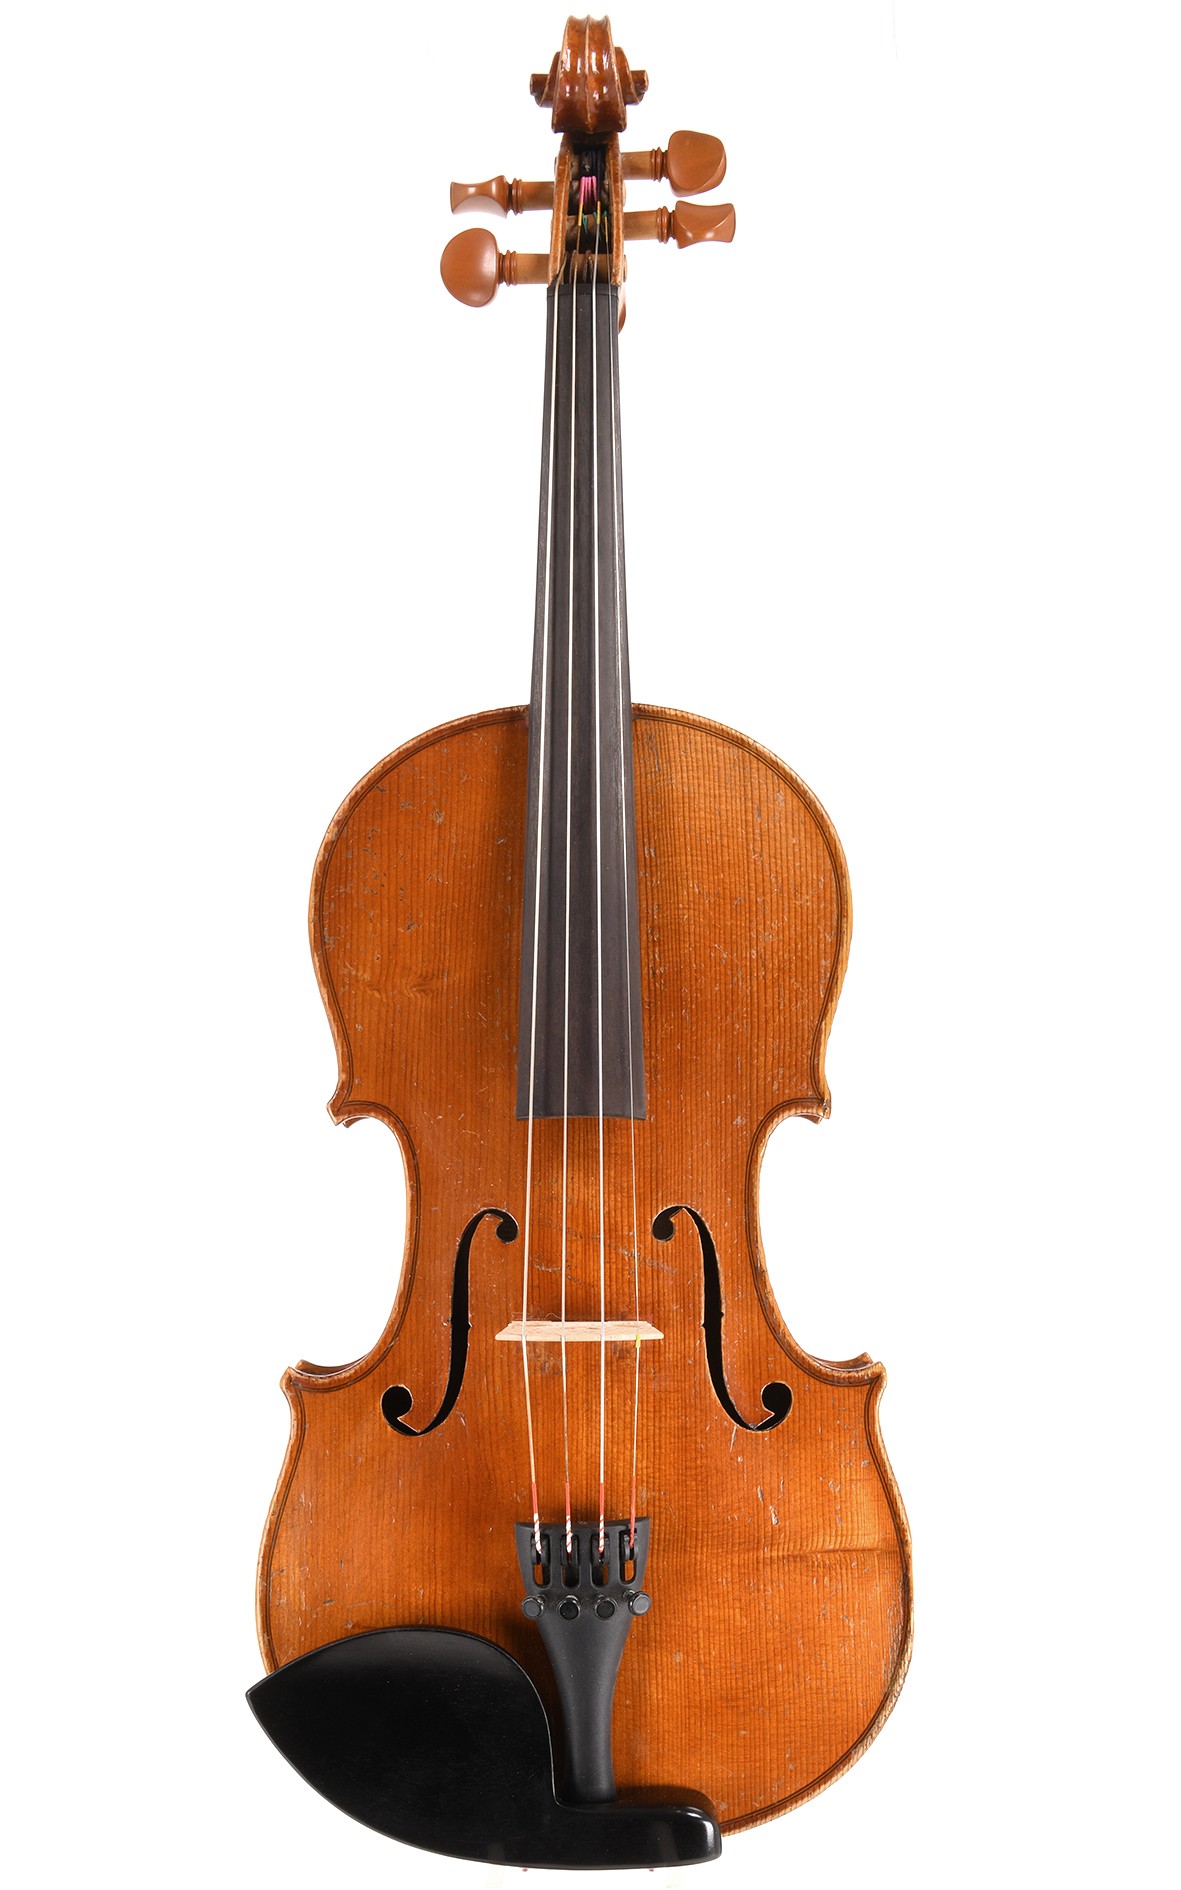 Antique French 3/4 violin from Mirecourt